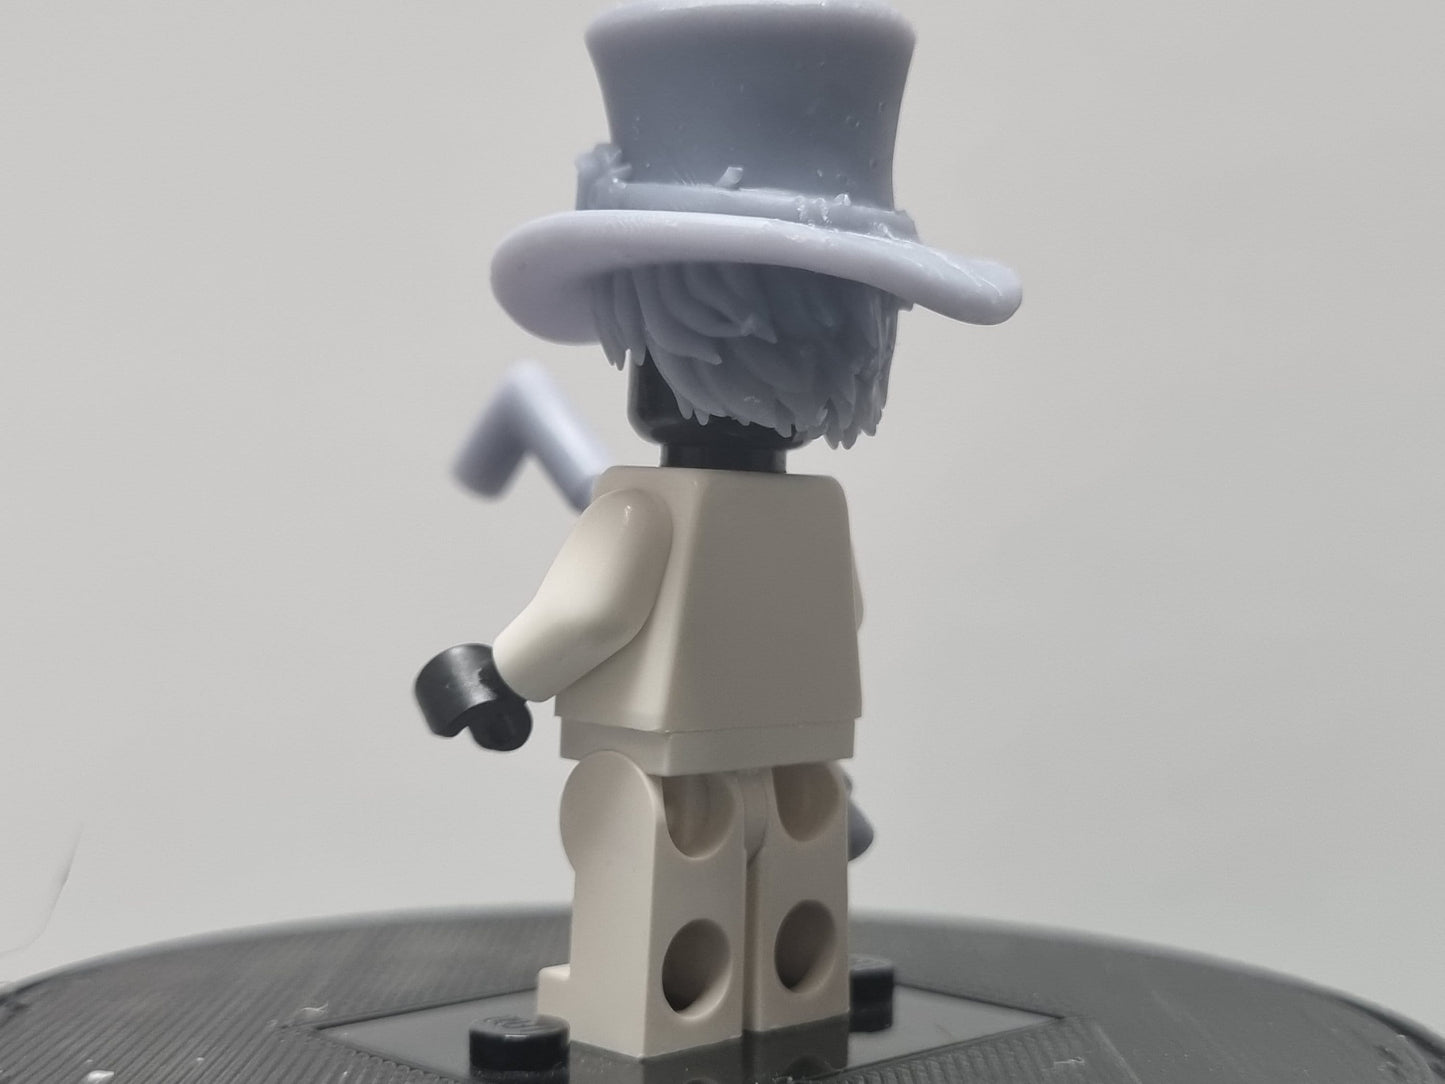 Building toy custom 3D printed man with pipe set!